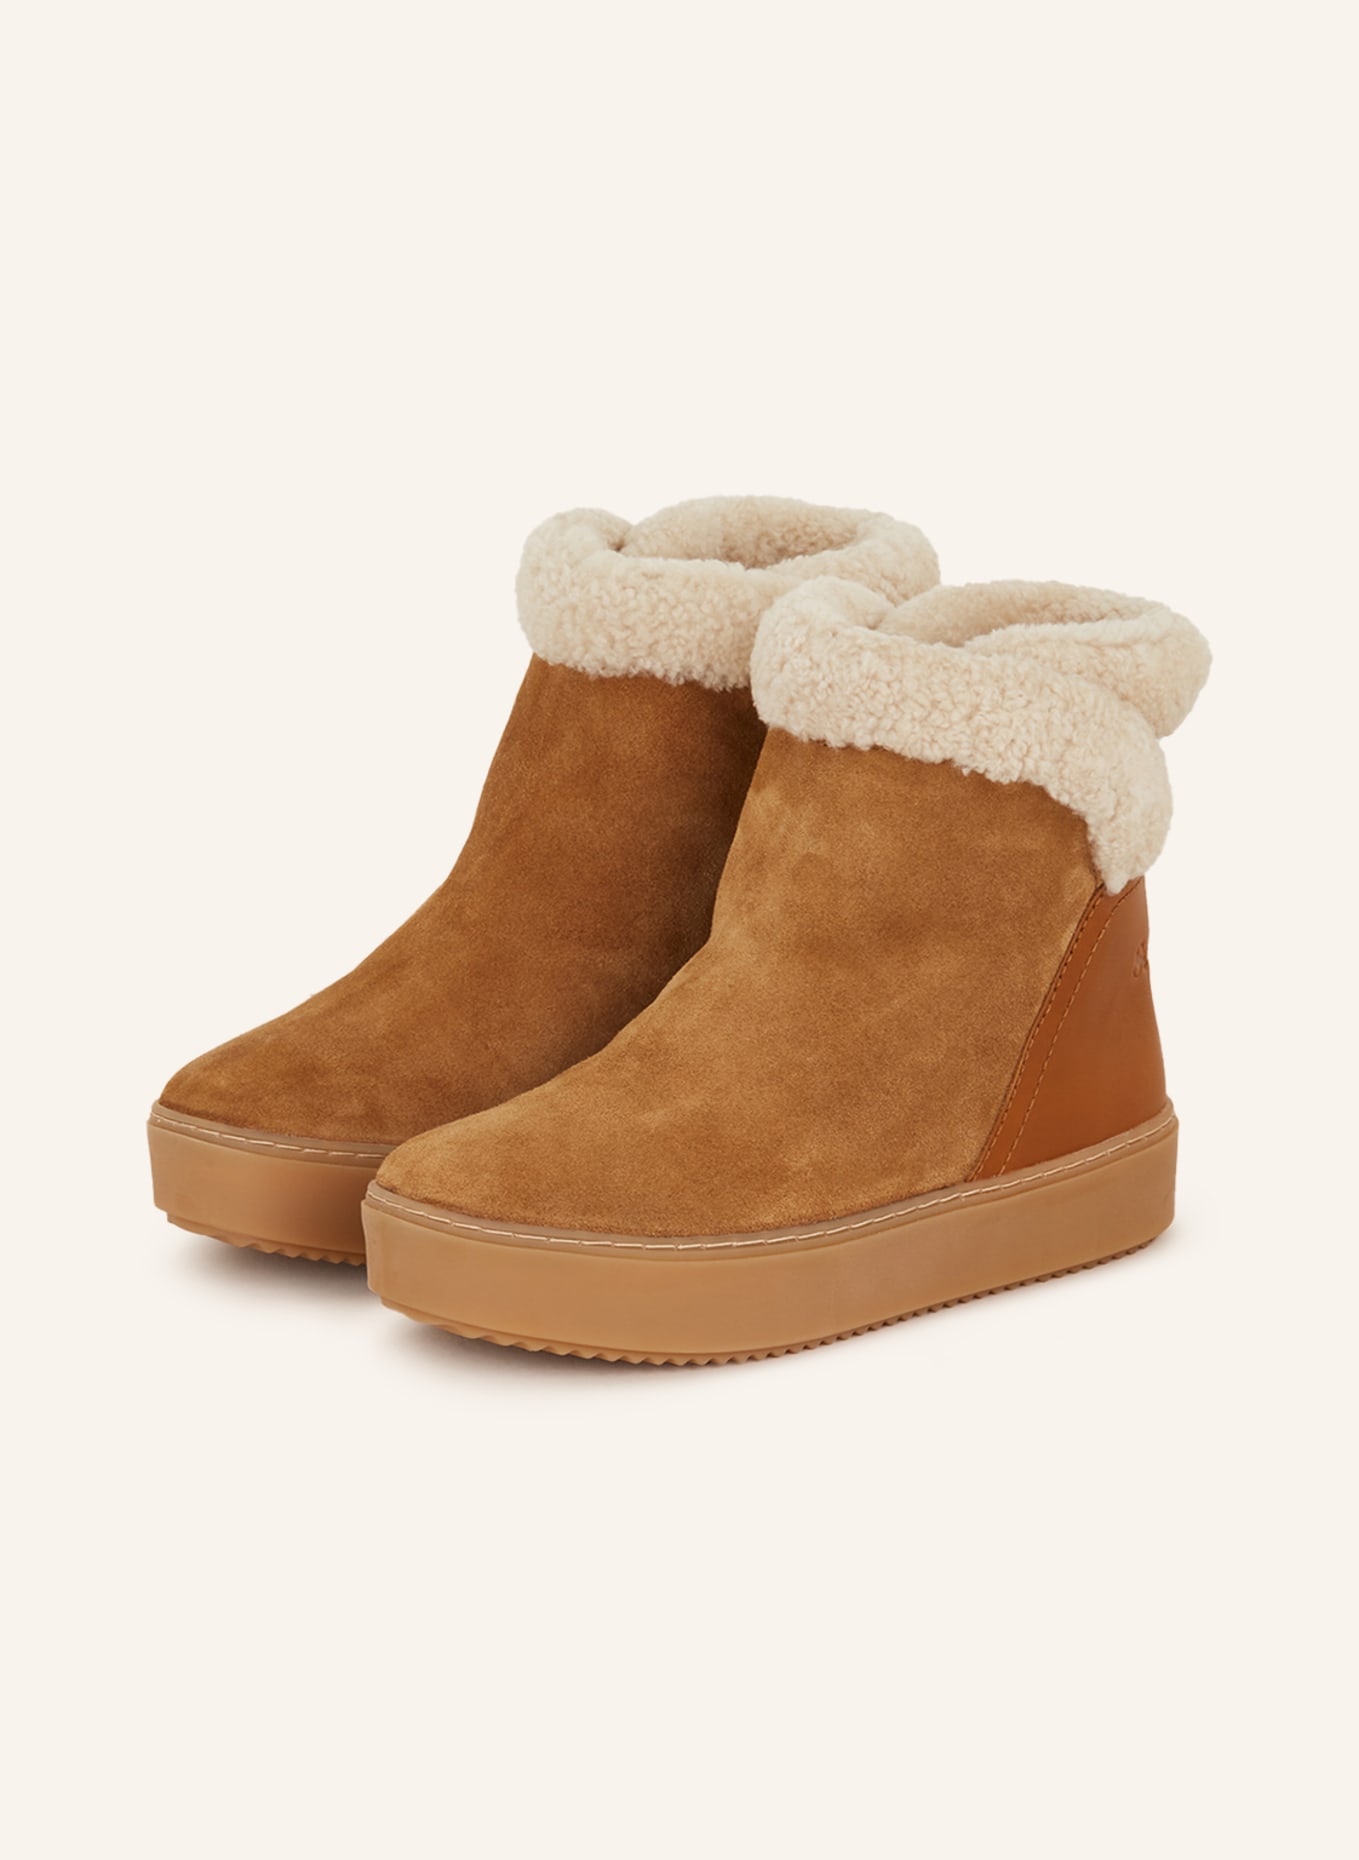 SEE BY CHLOÉ Boots JULIET, Farbe: 506/533/123 Sand(Bild null)